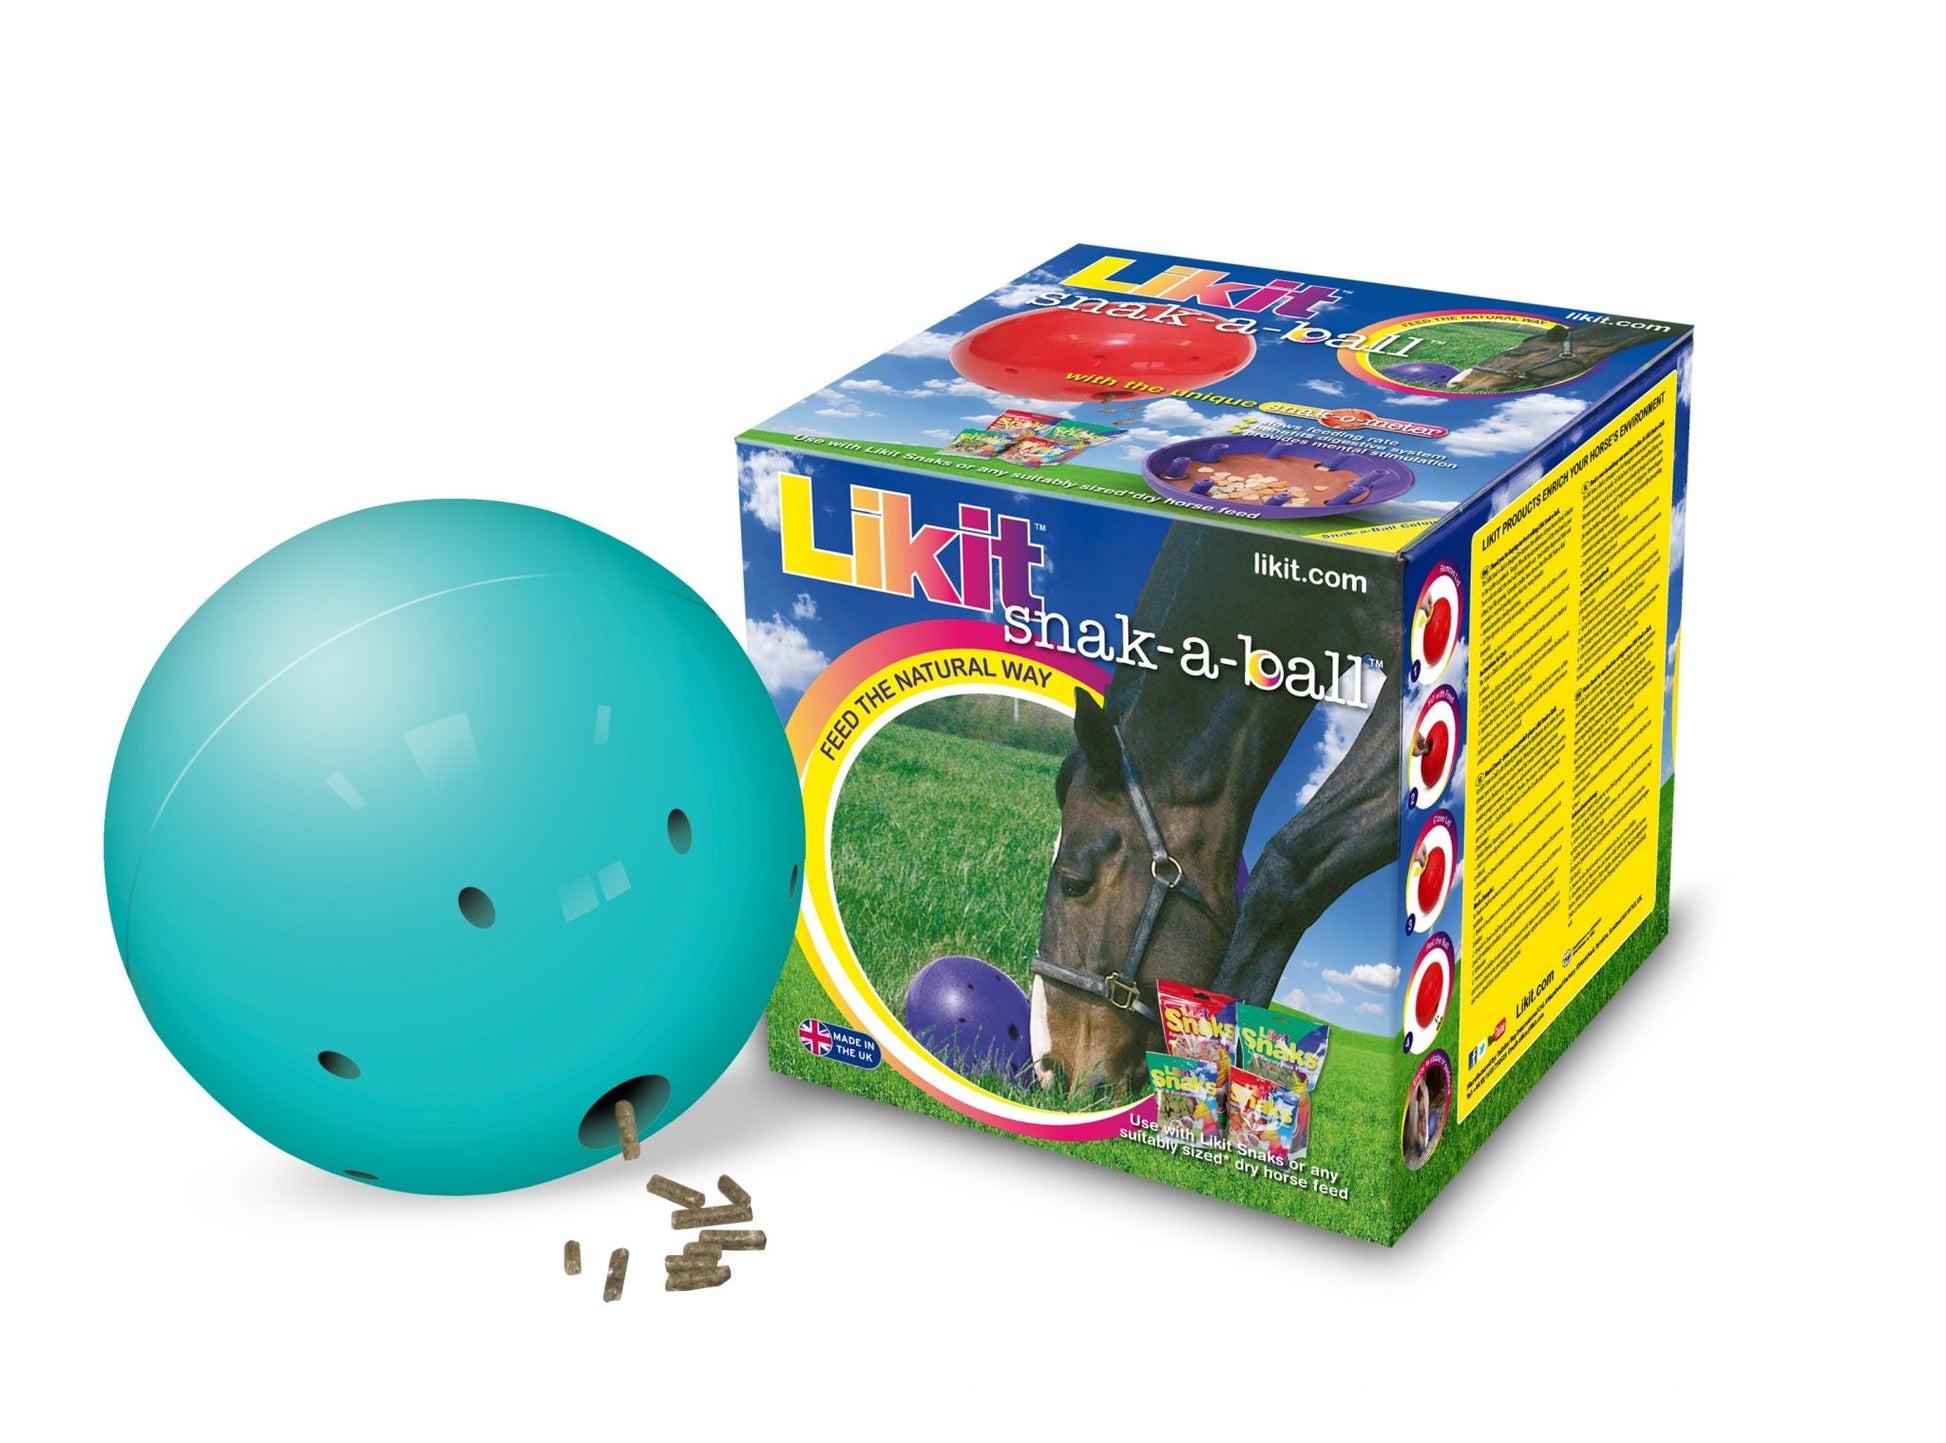 Likit Snack A Ball, a horse treat toy for equine enrichment.